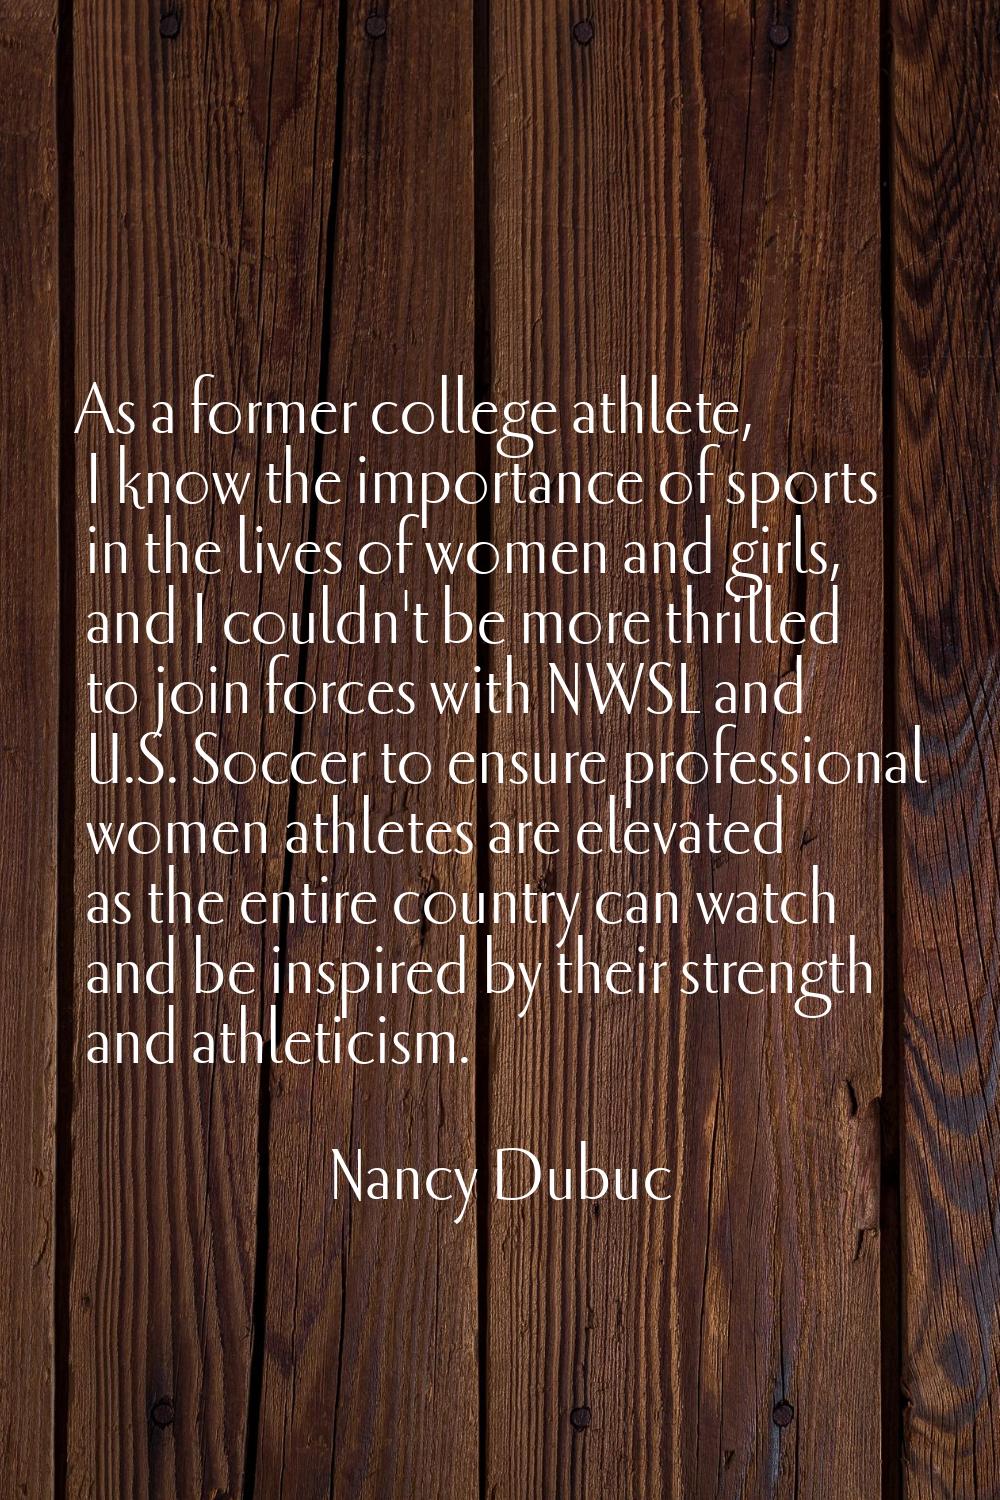 As a former college athlete, I know the importance of sports in the lives of women and girls, and I